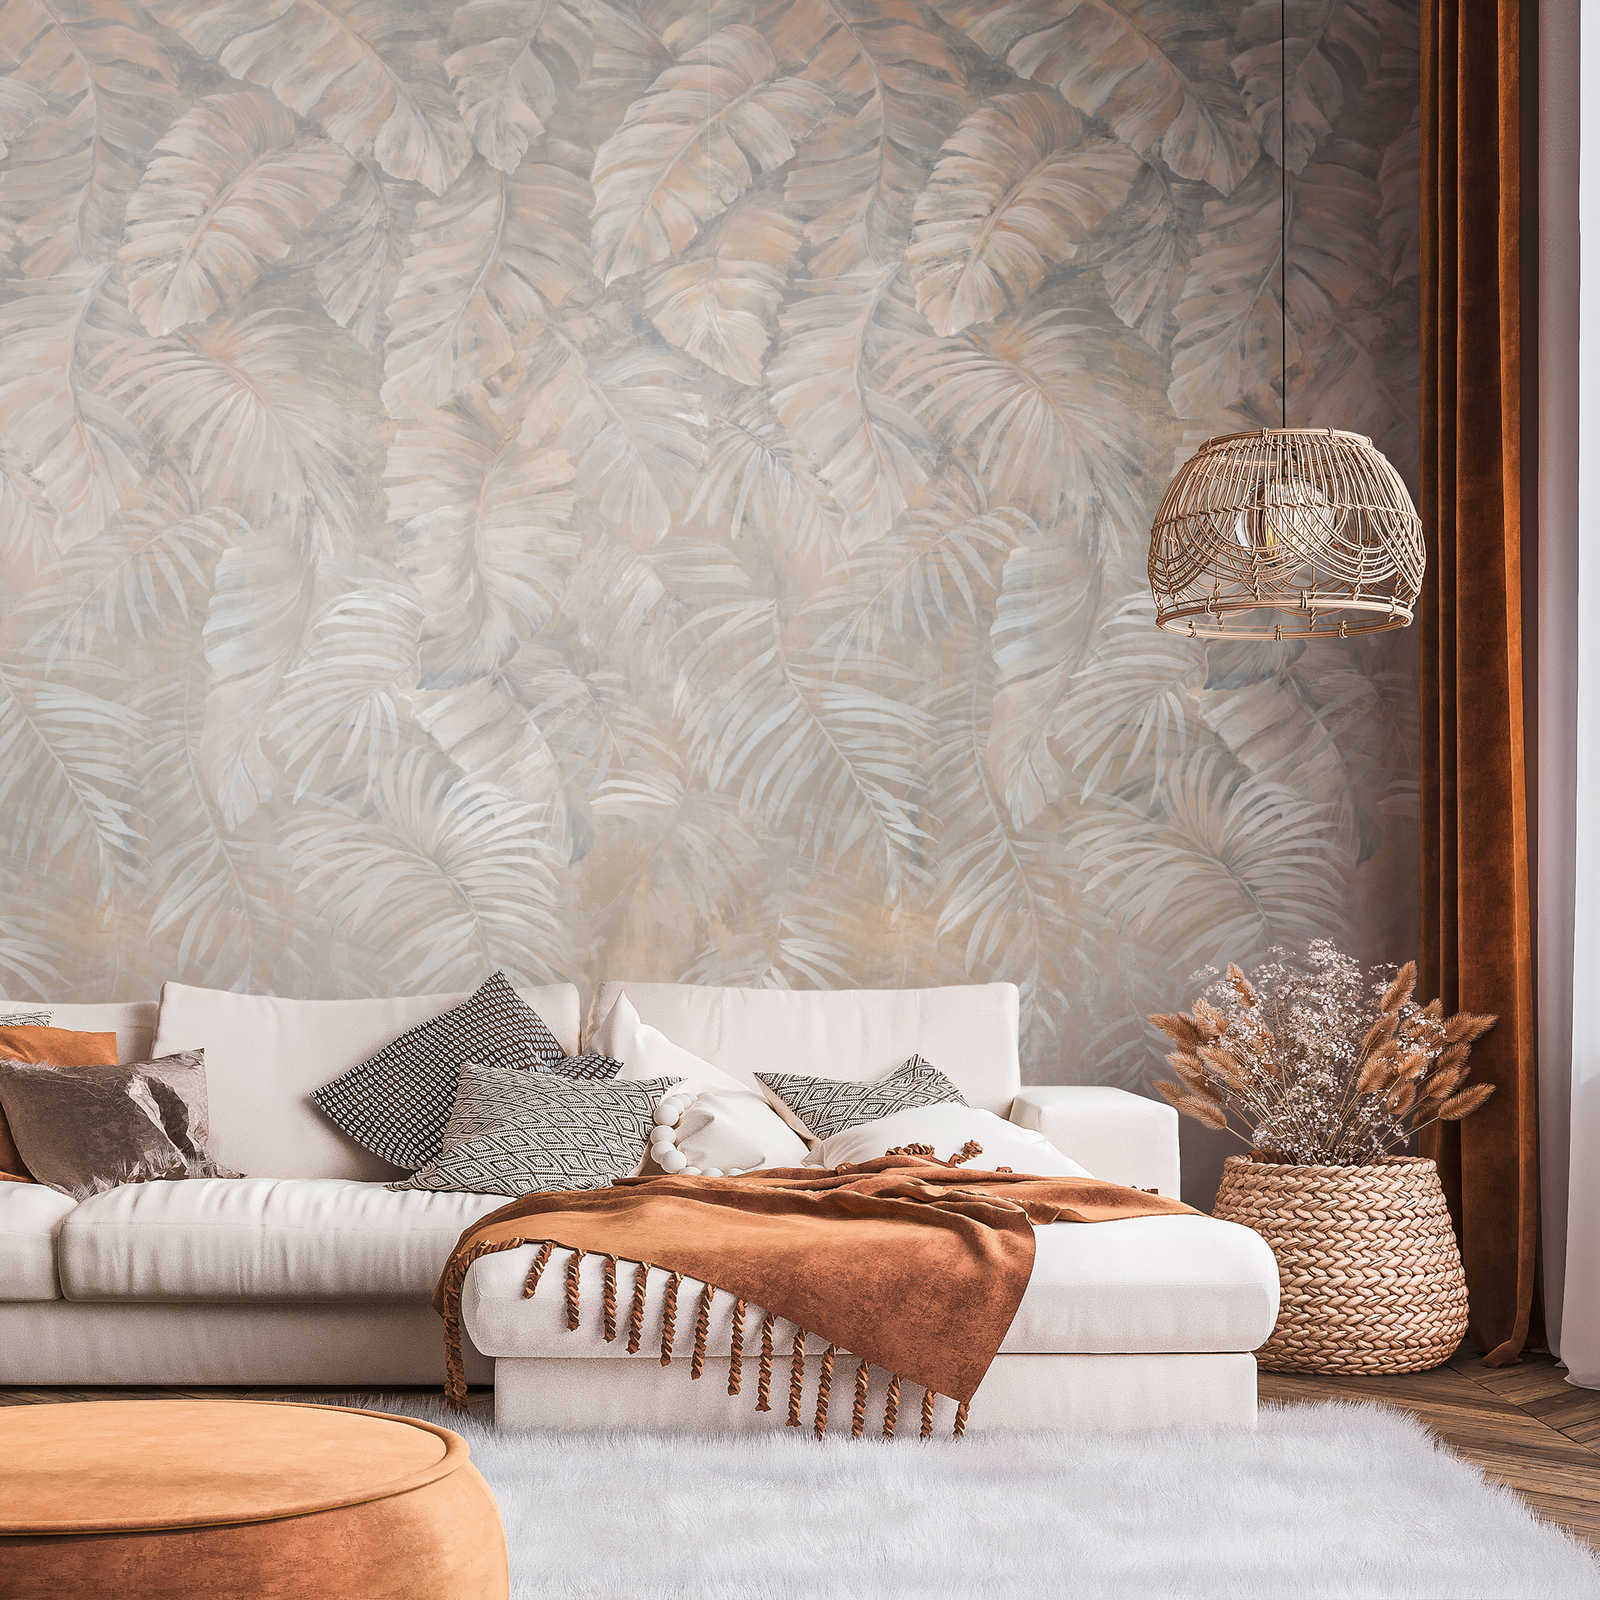 Large palm leaves wallpaper in subtle earth tones - brown, beige, cream
